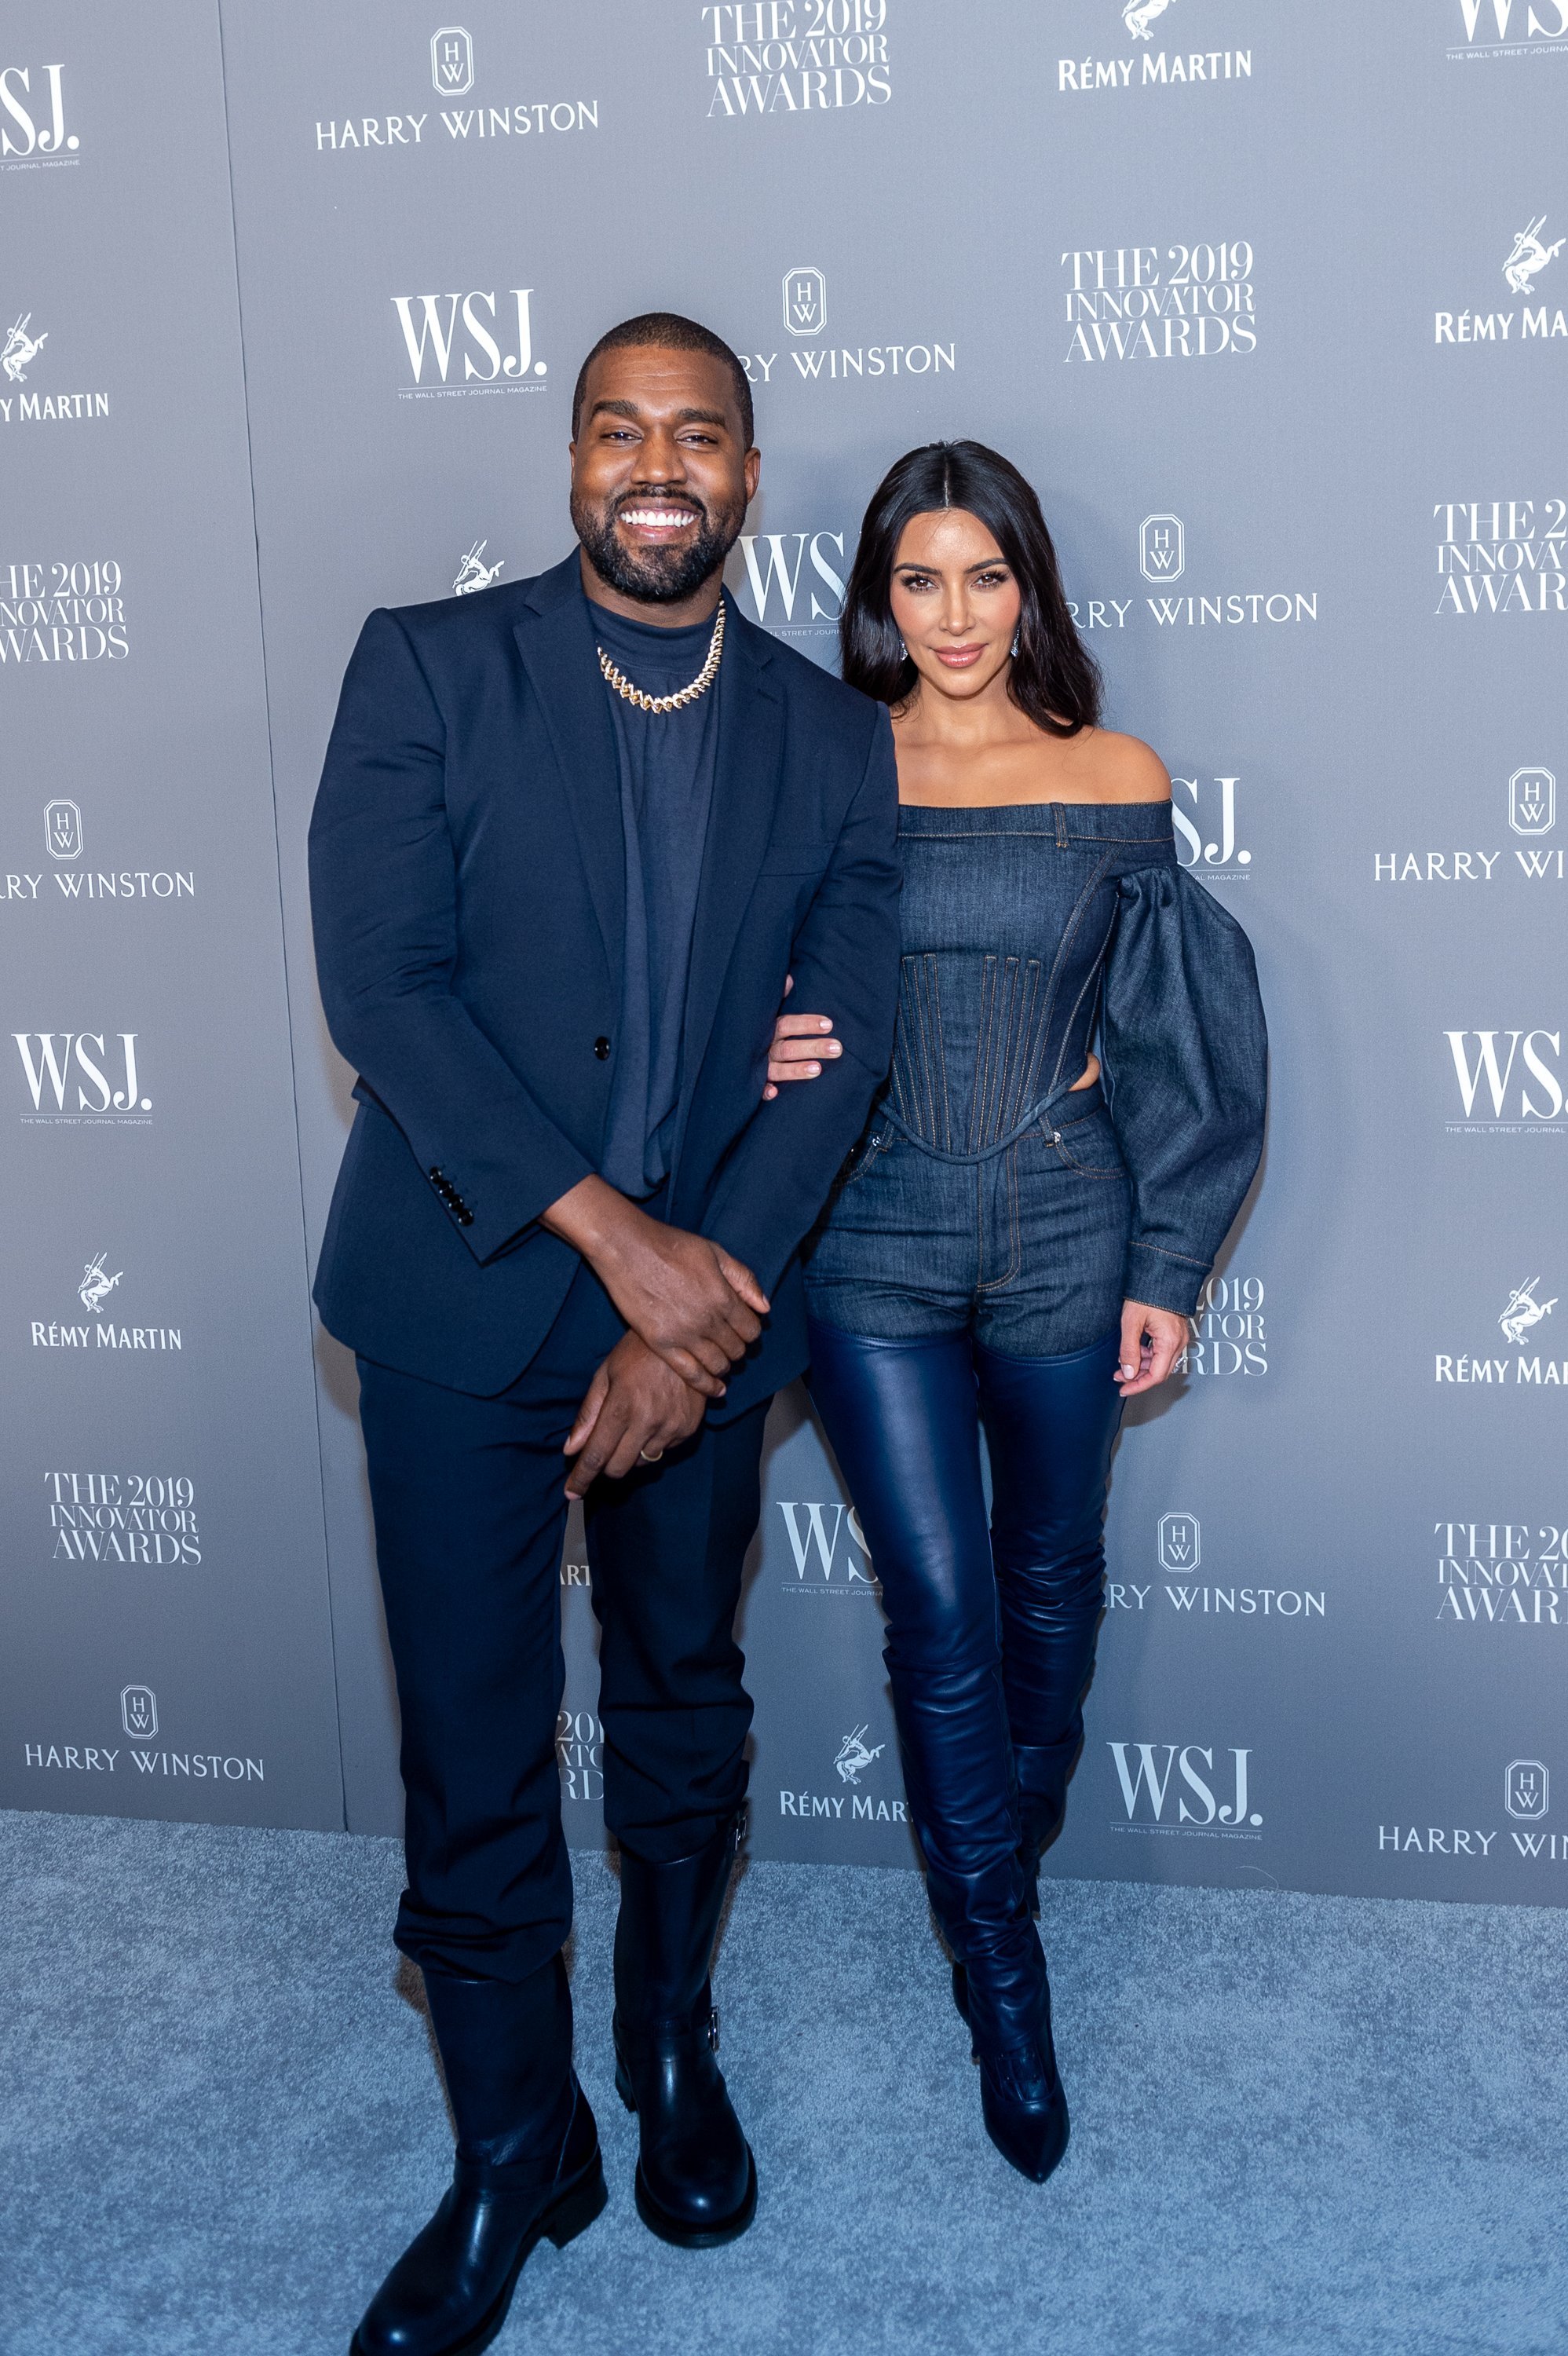 Kanye West and Kim Kardashian attend the WSJ Mag 2019 Innovator Awards at The Museum of Modern Art in New York City on November 06, 2019. | Source: Getty Images.